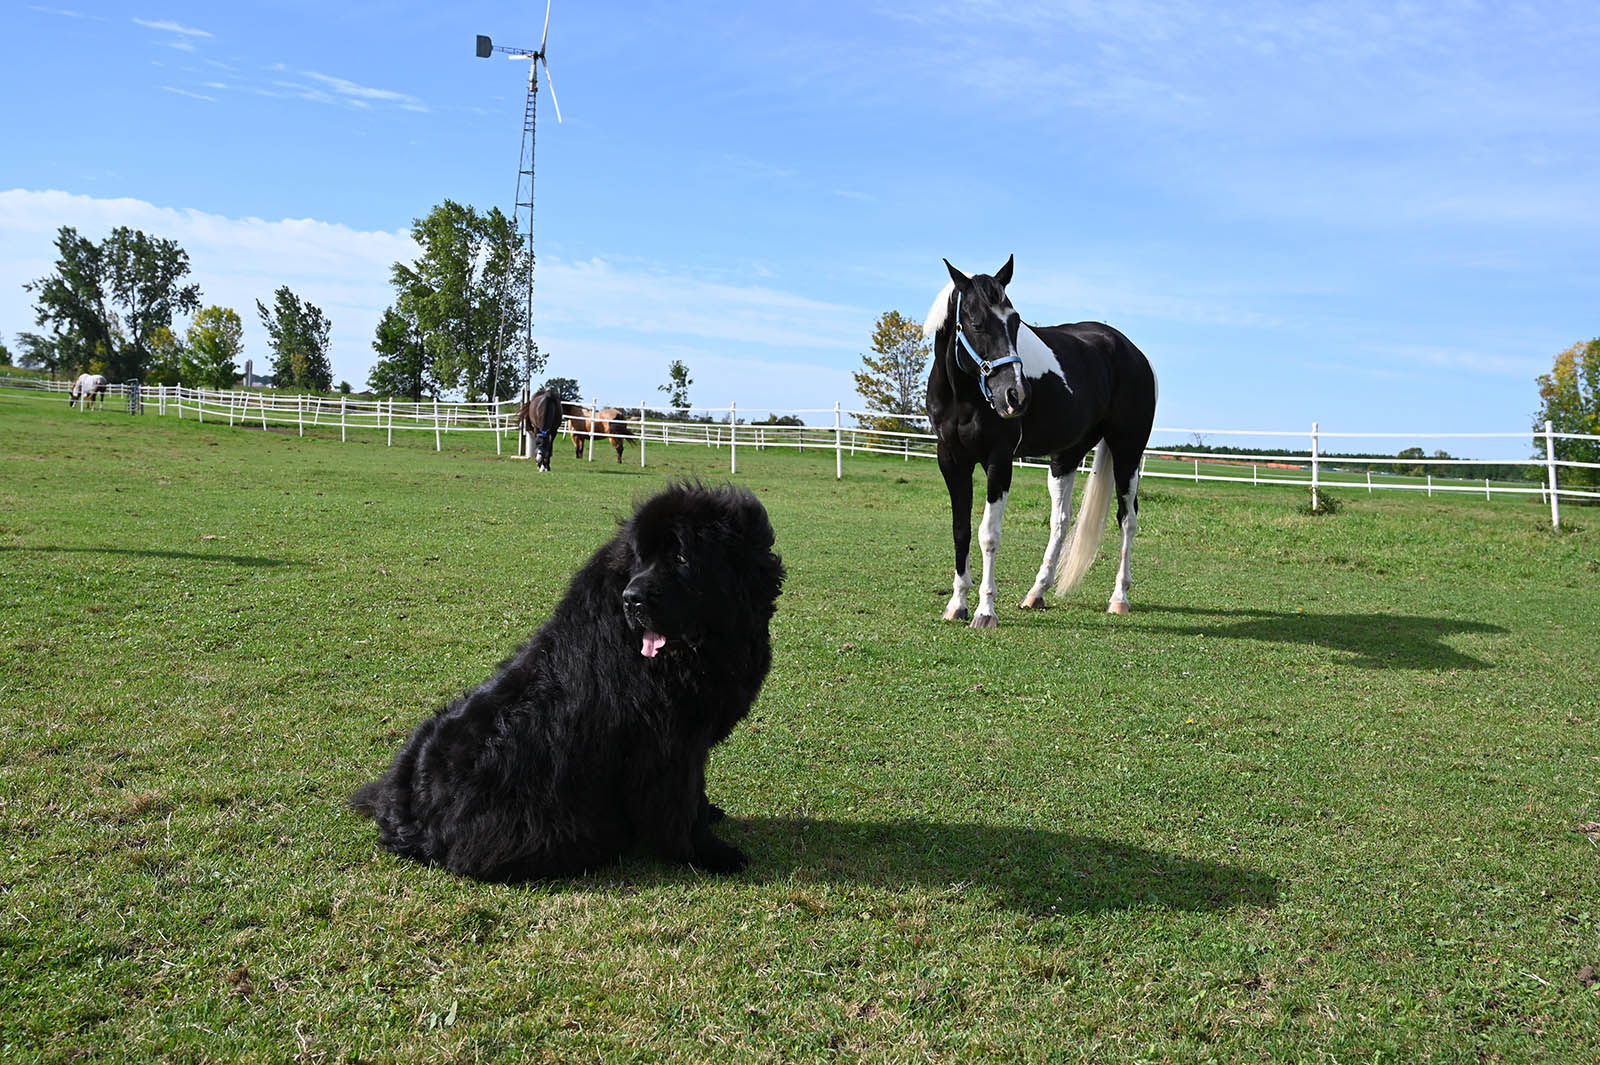 Black and white horse and black Newfoundland dog together out in a green grassy pasture